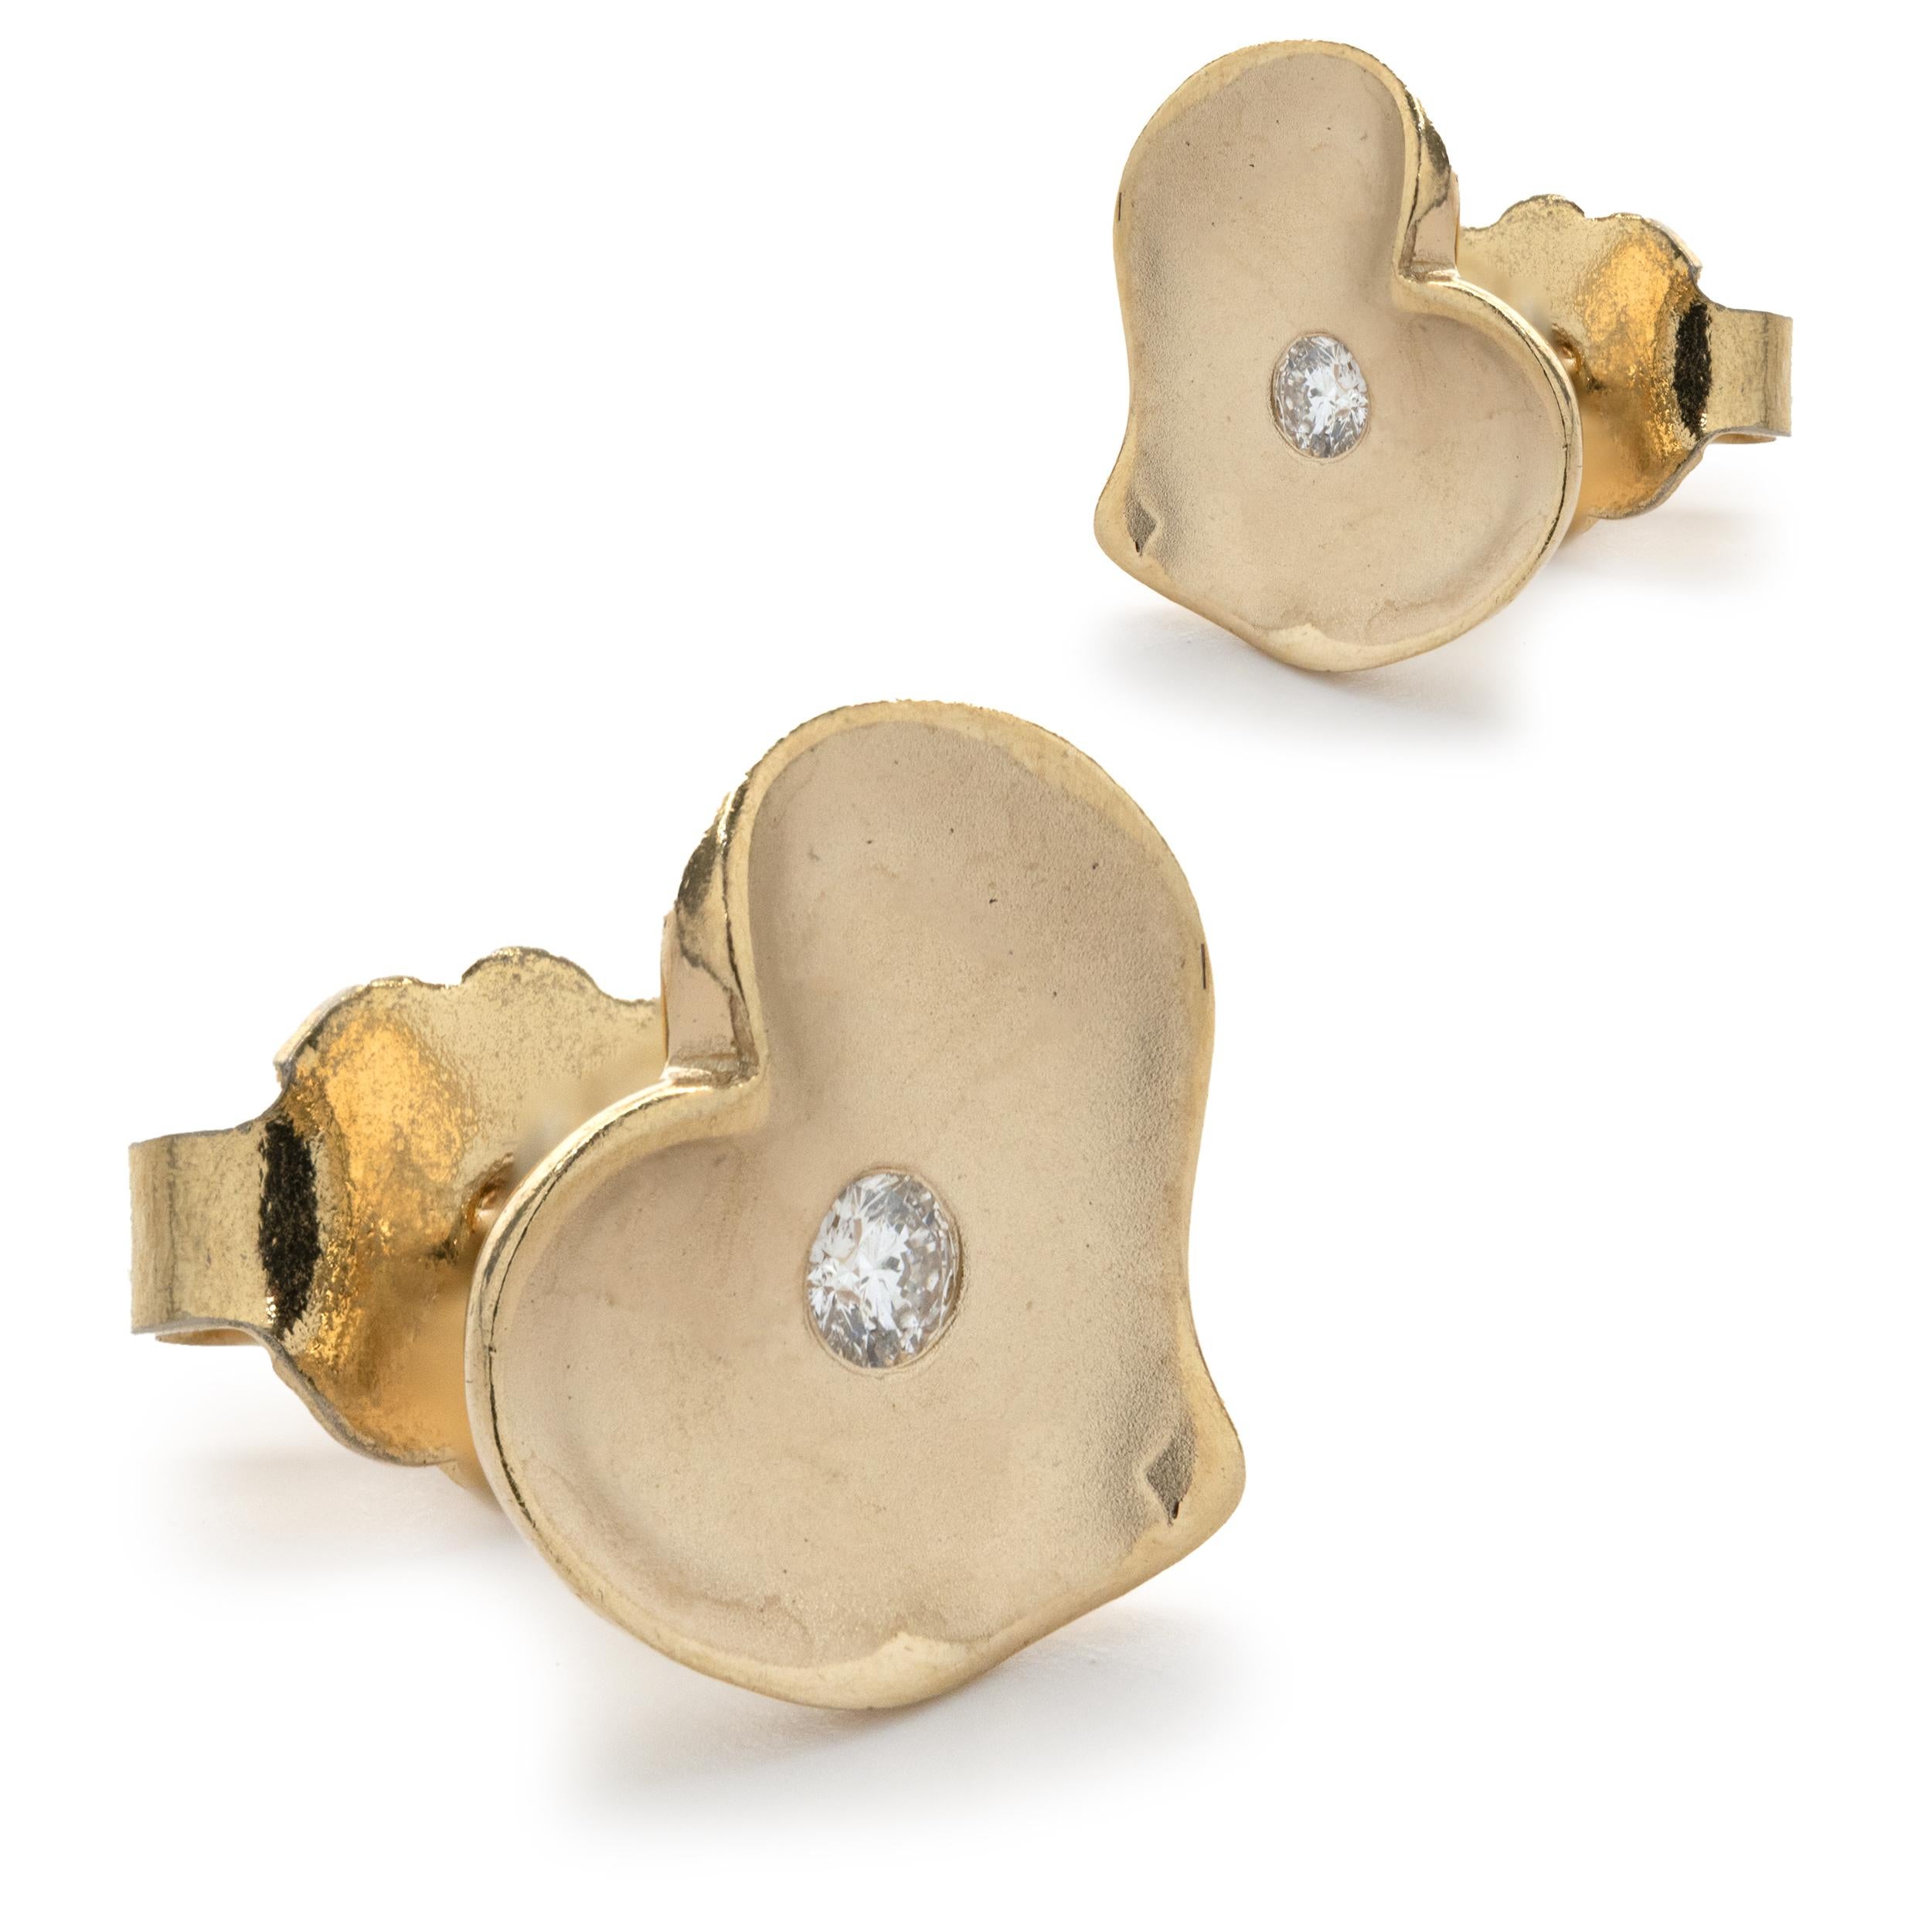 Designer: BAB
Material: 14K yellow gold 
Diamond: 2 round brilliant cut = .04cttw
Color: H 
Clarity: SI1
Dimensions: earrings measure 8.5 X 10mm
Weight: 2.10 grams
